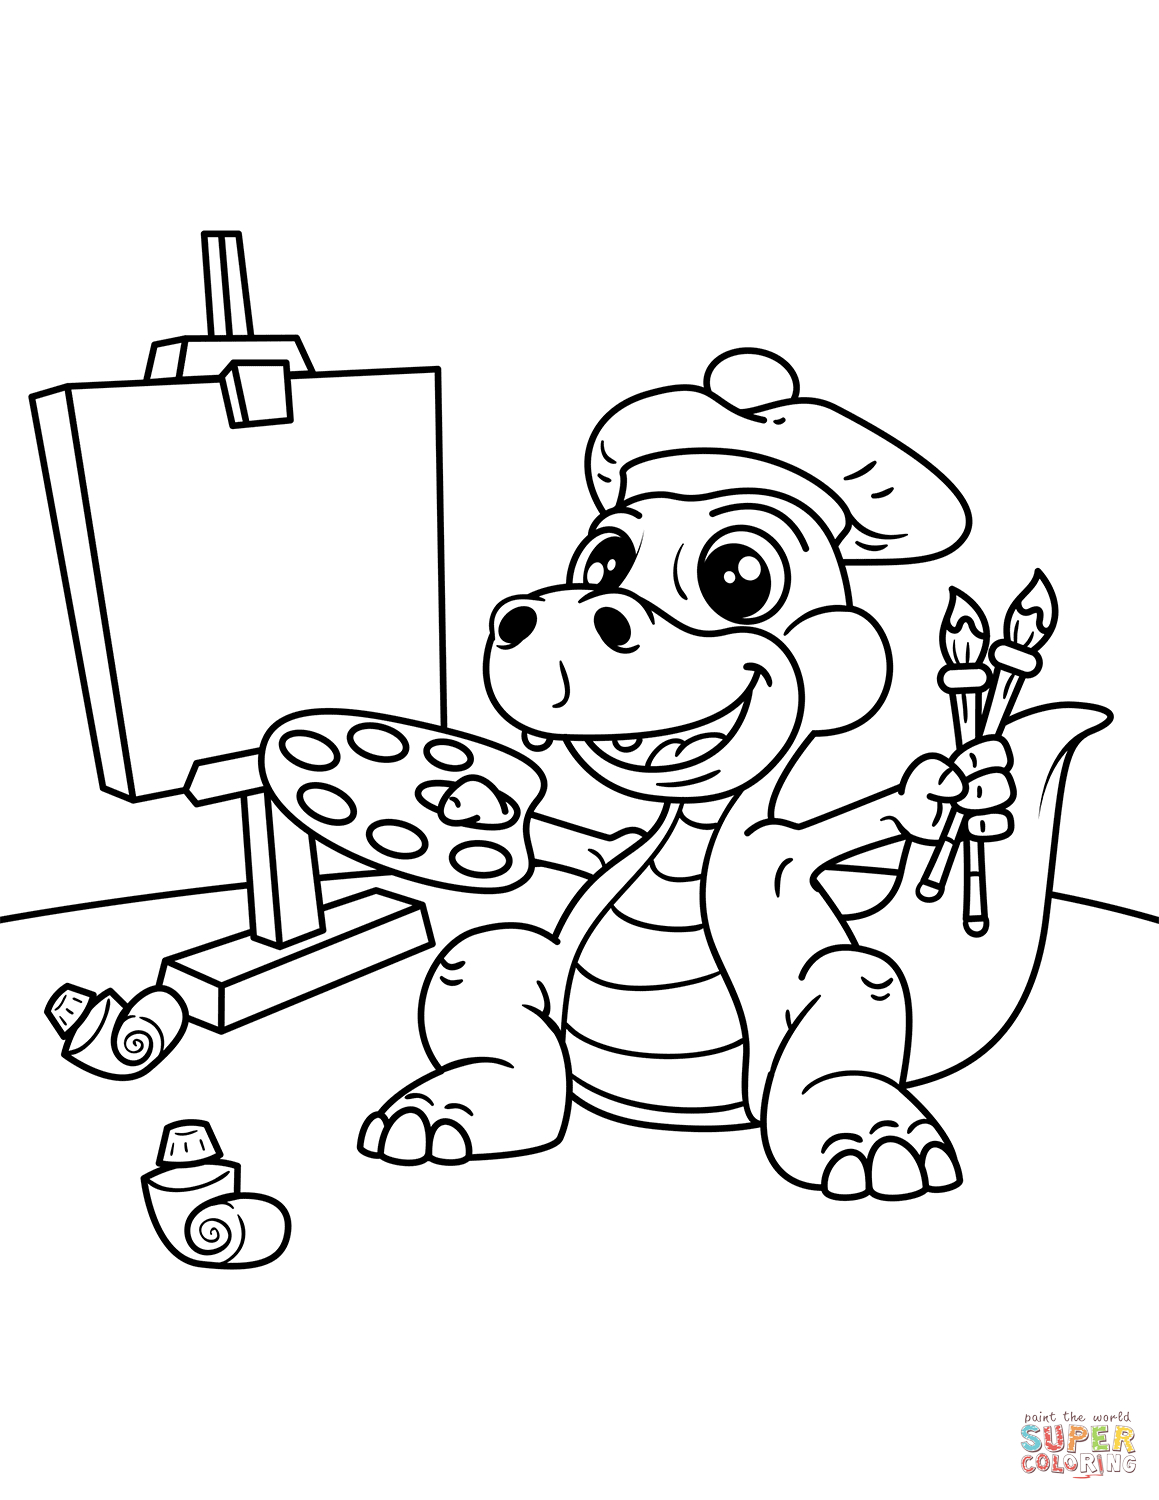 Colors Coloring Pages Cute Dinosaur Artist With Easel Brush And Palette Of Colors